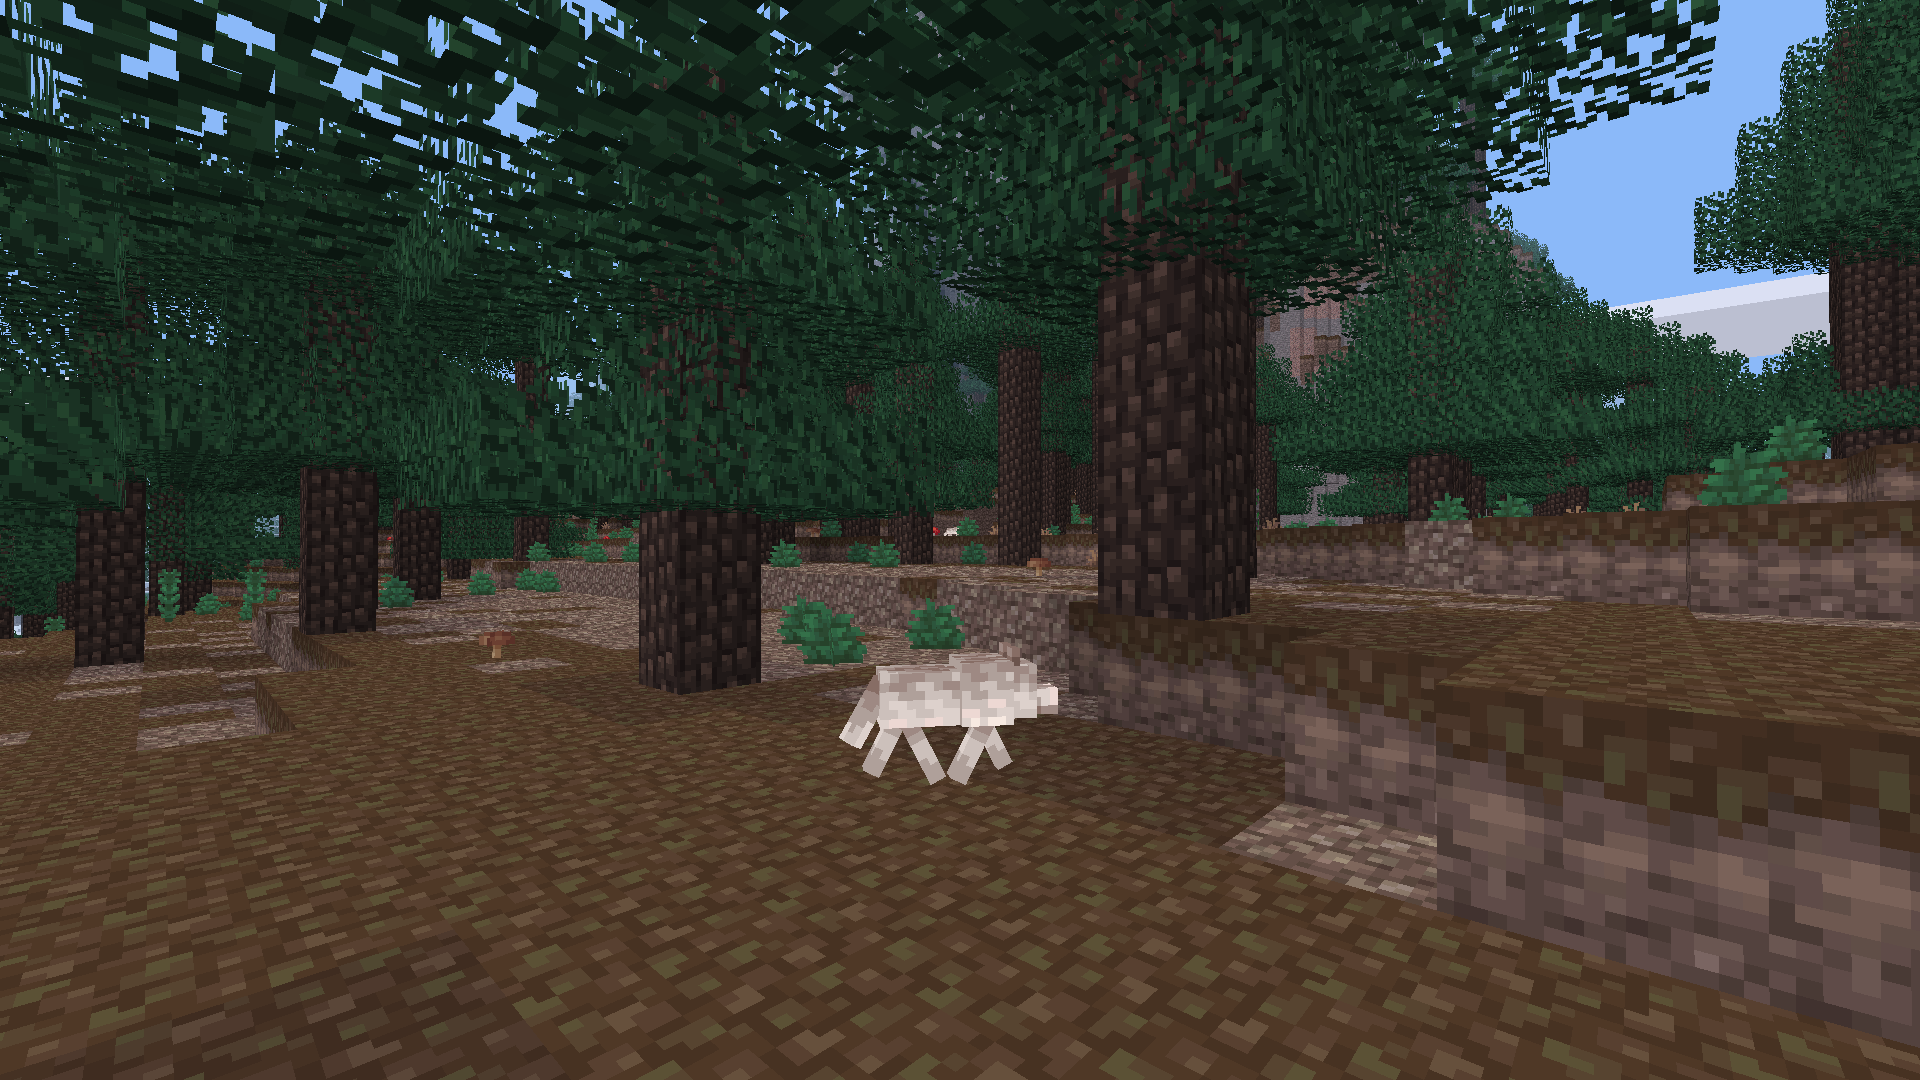 Just a wolf minding its own business in a taiga